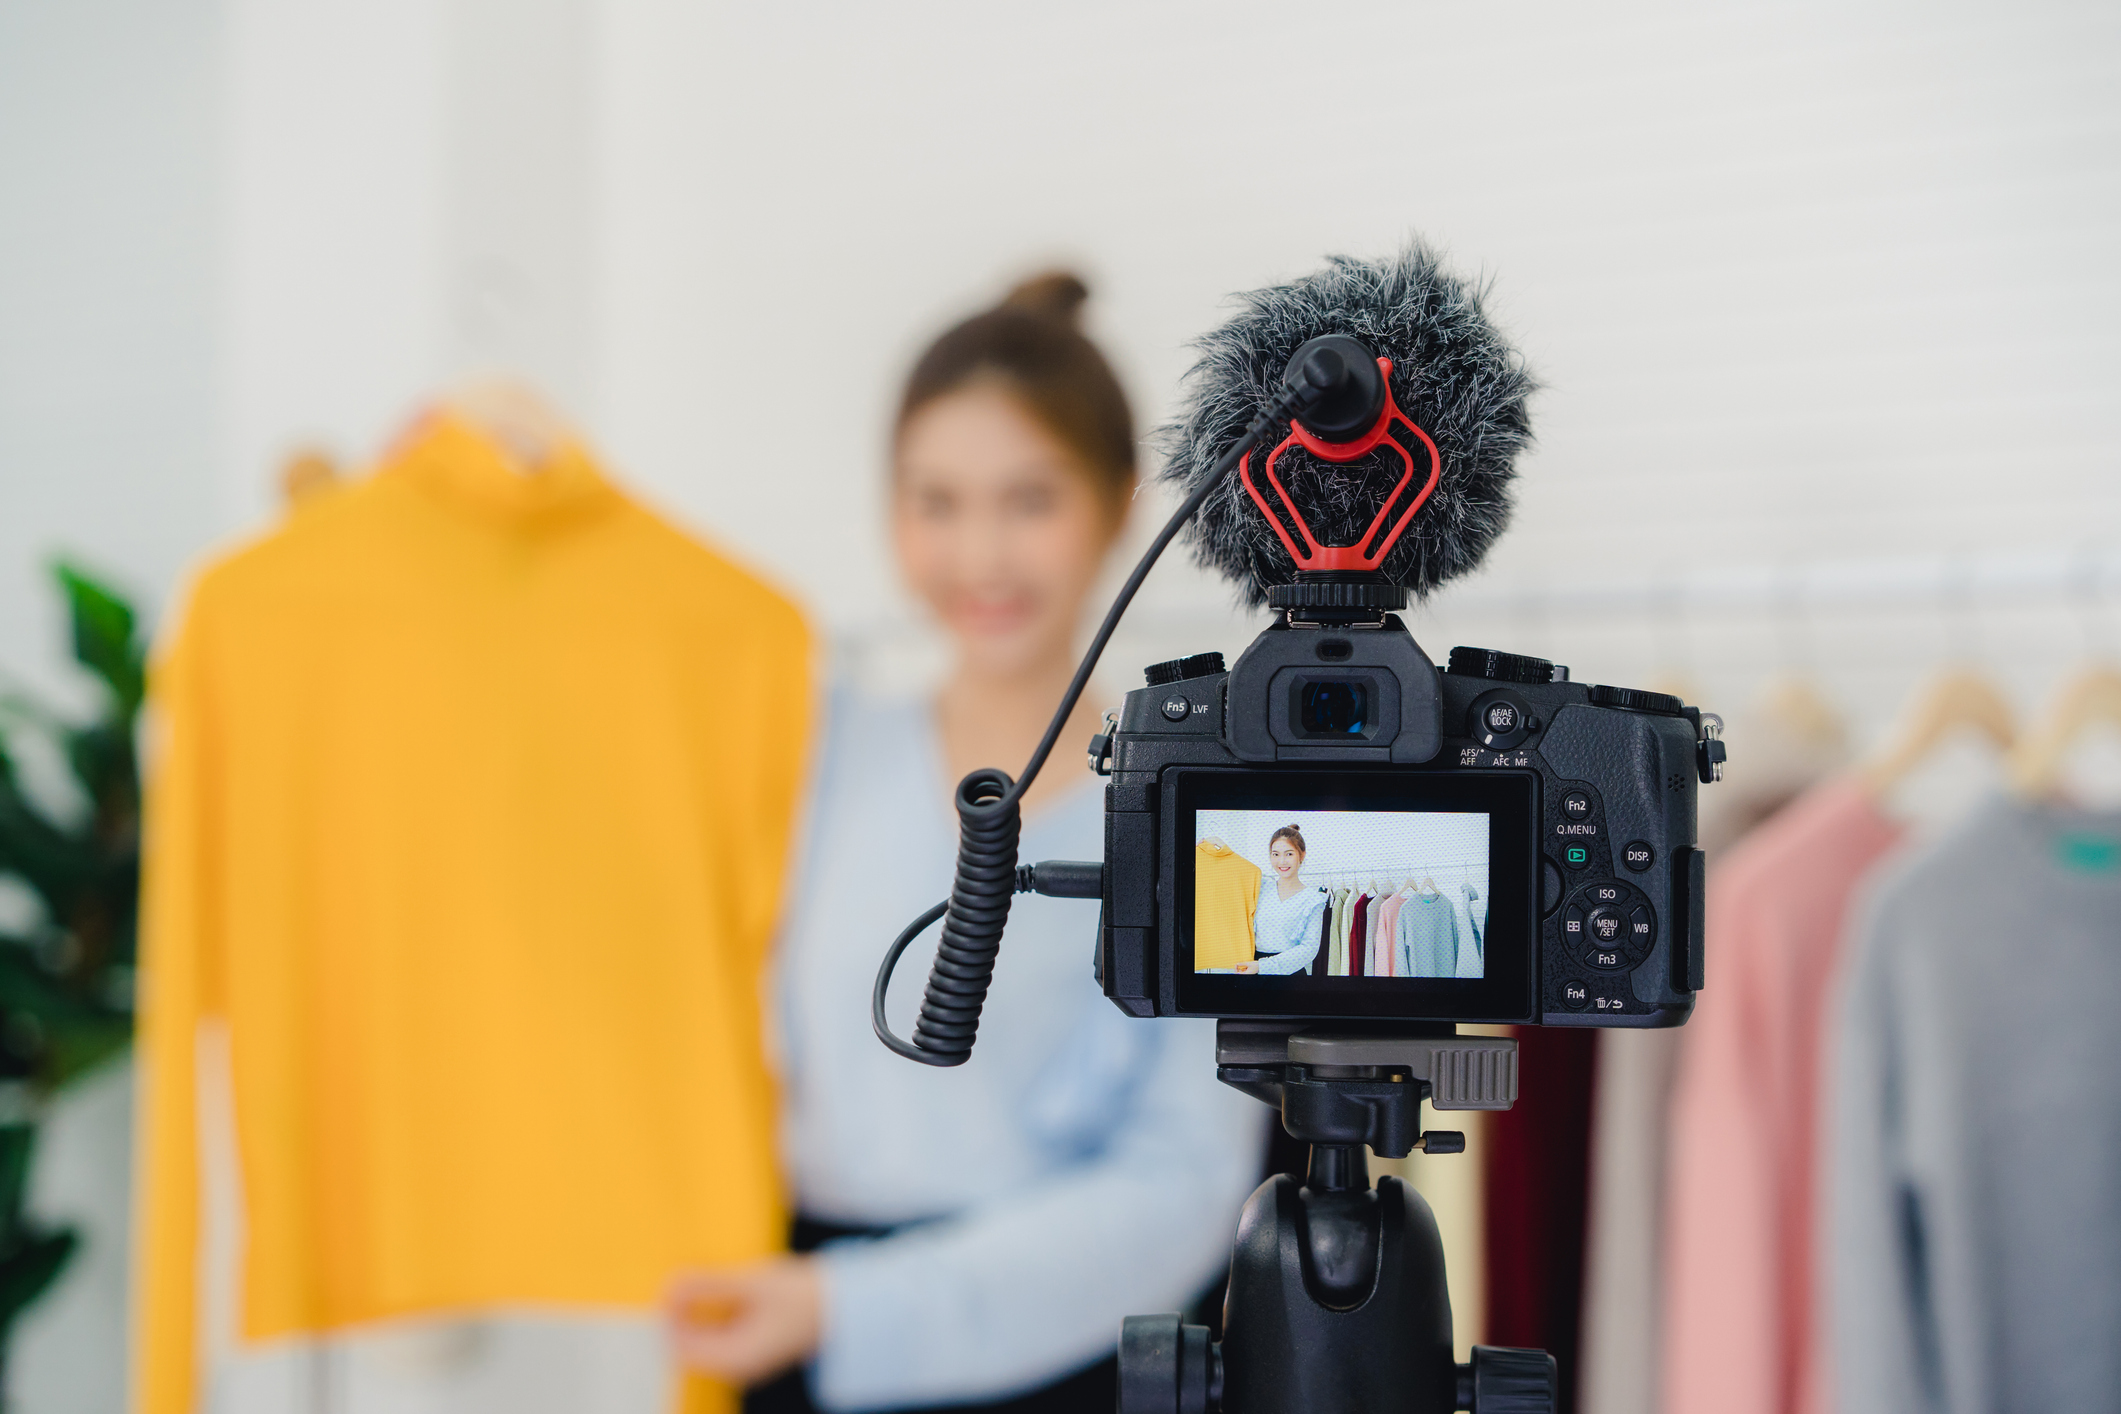 Asian fashion blogger showcasing products in front of video camera